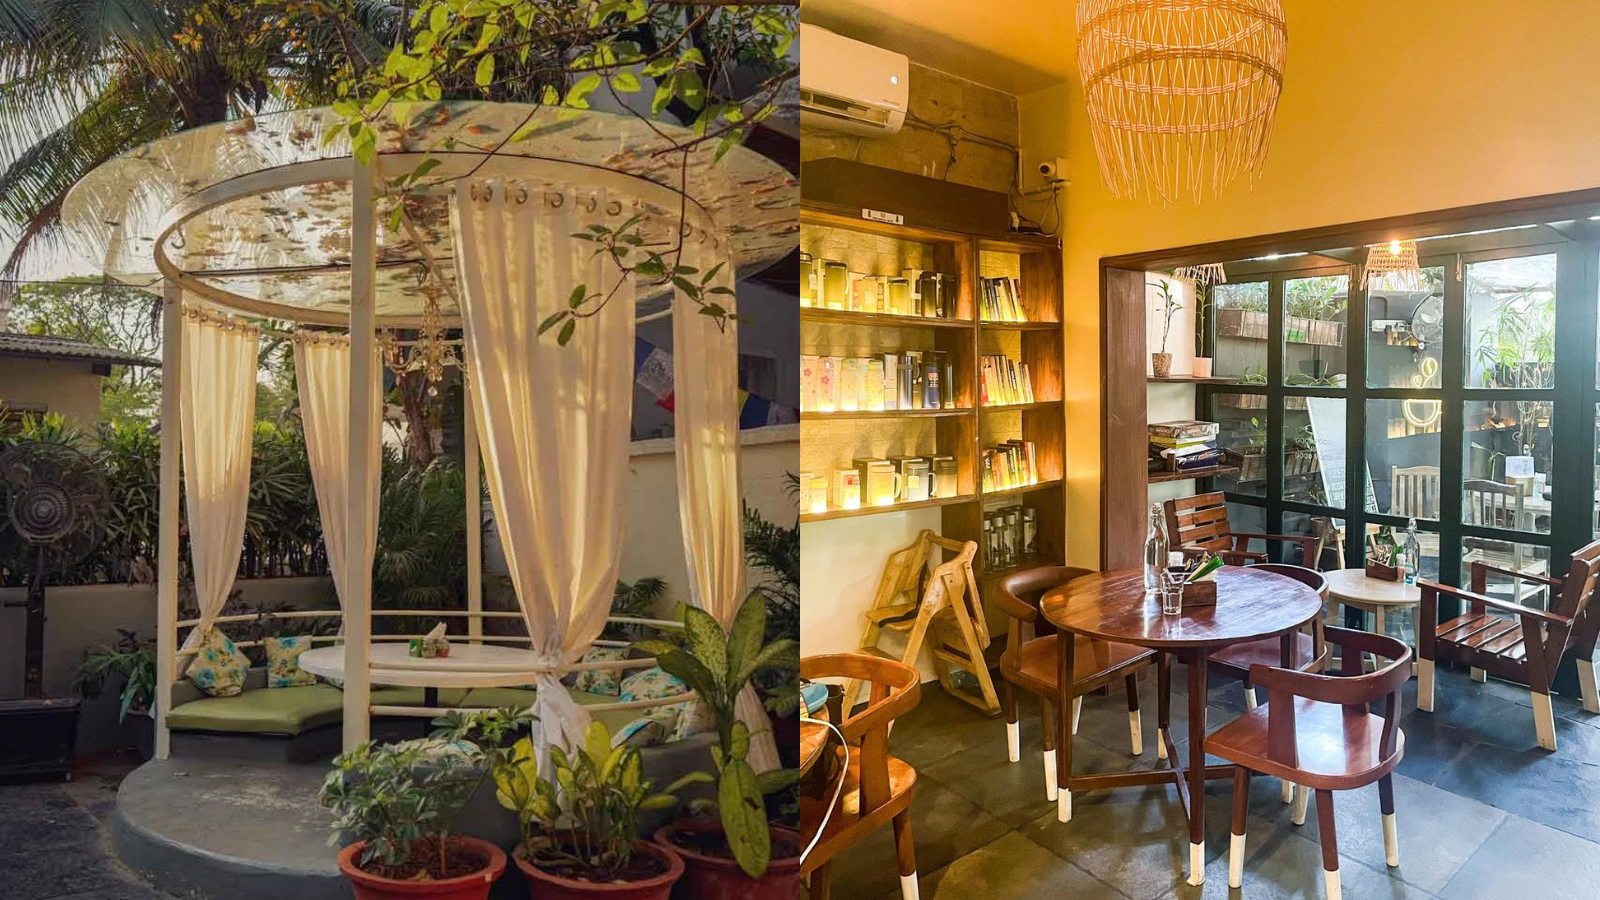 8 Instagrammable Cafes In Pune Perfect For Your Feed